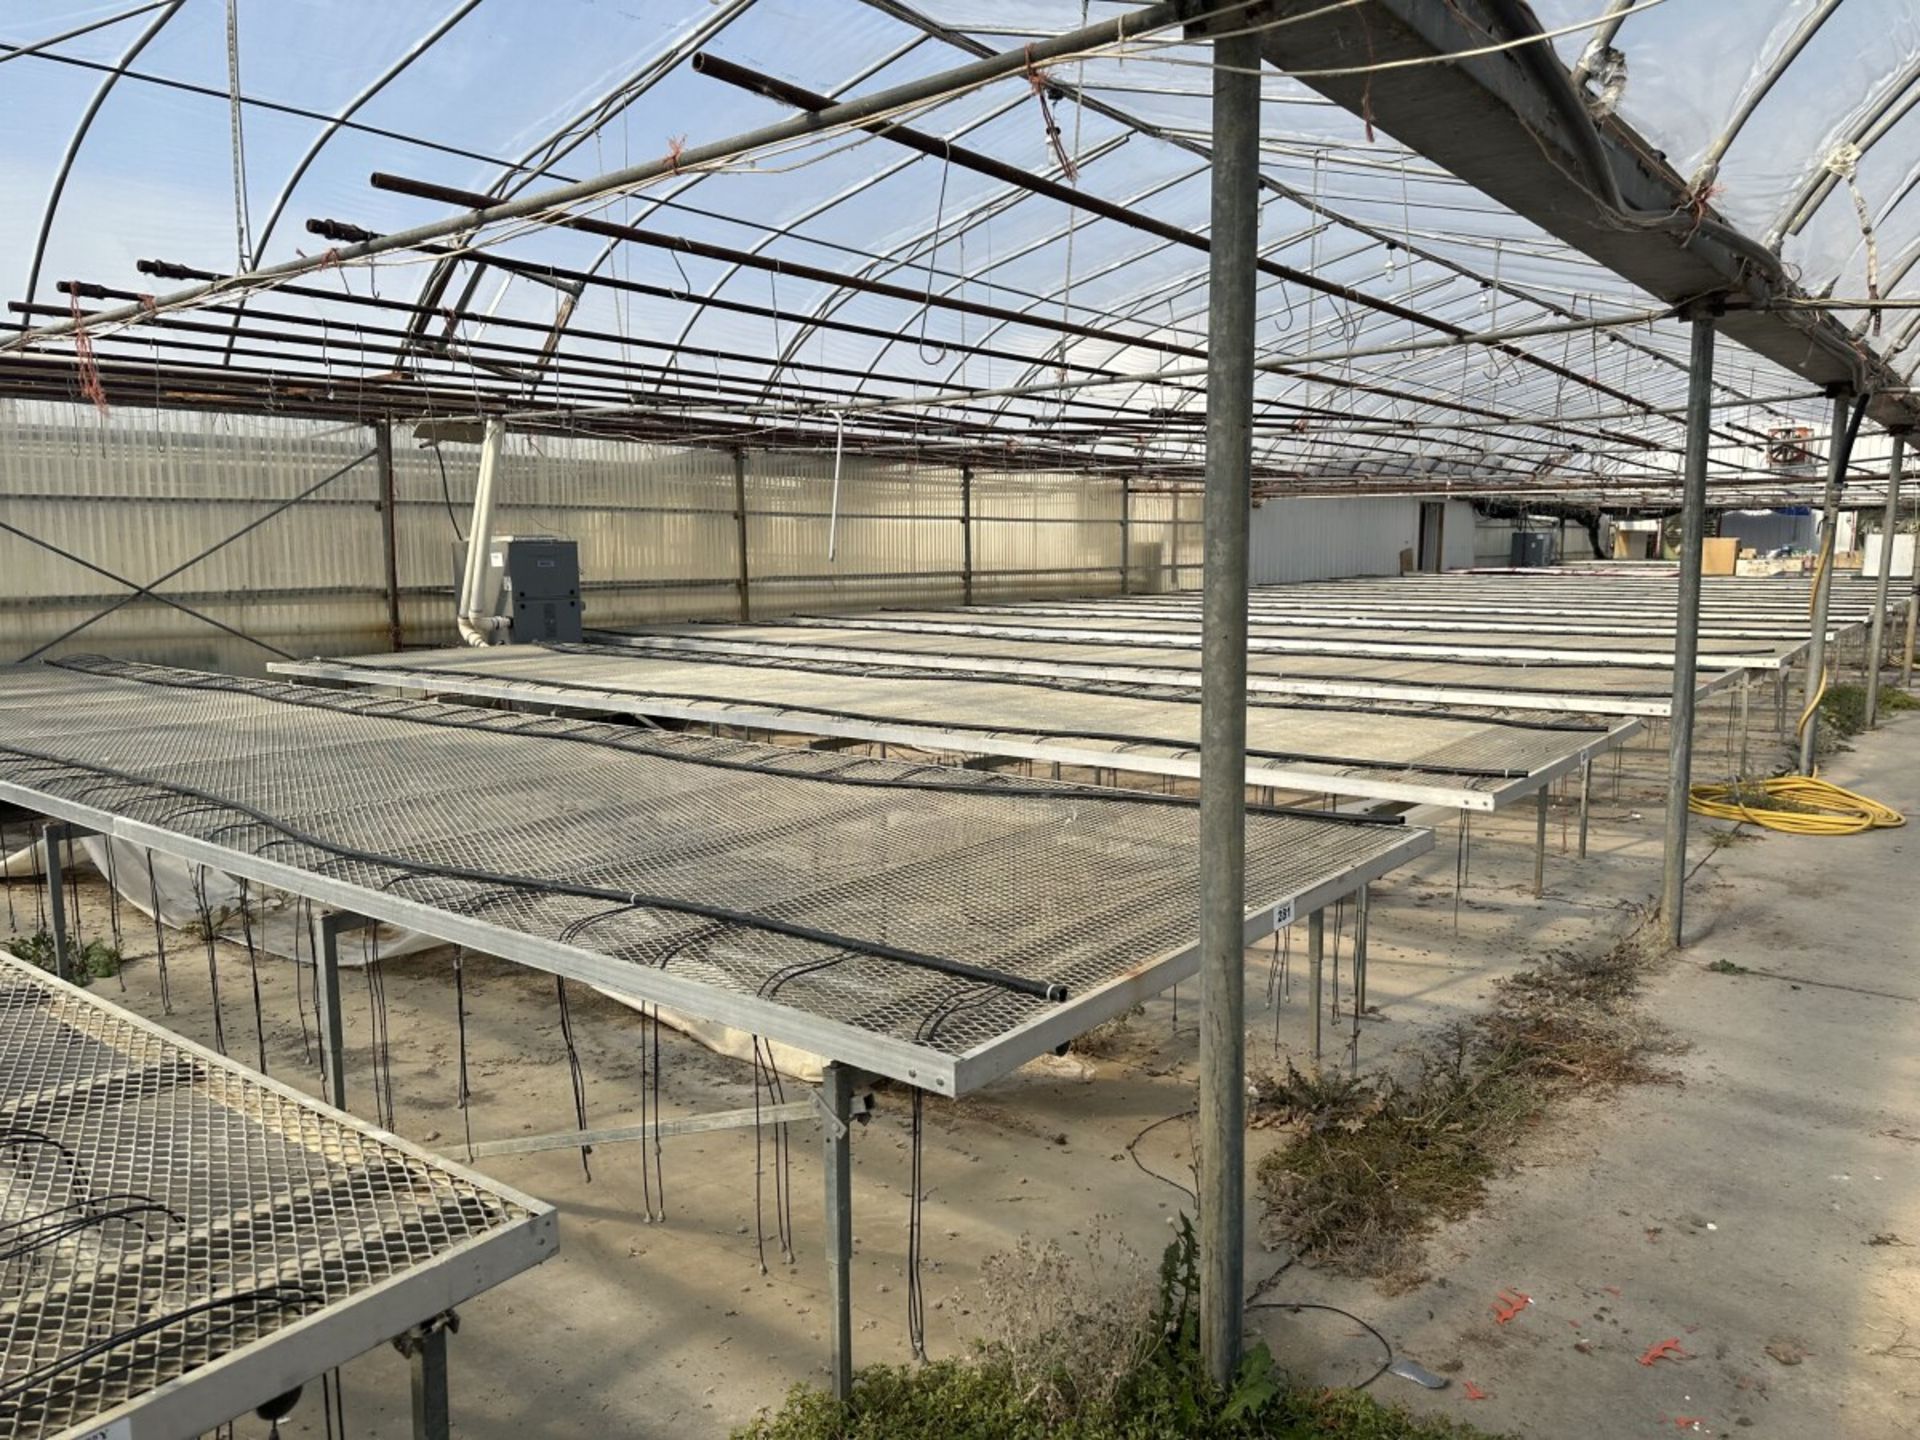 WESTBROOK GUTTER CONNECT 2-BAY GREENHOUSE 60FT X 144FT X 96” H & 2-BAY 60FT X 72 FT X 96”, INCLUDING - Image 69 of 95